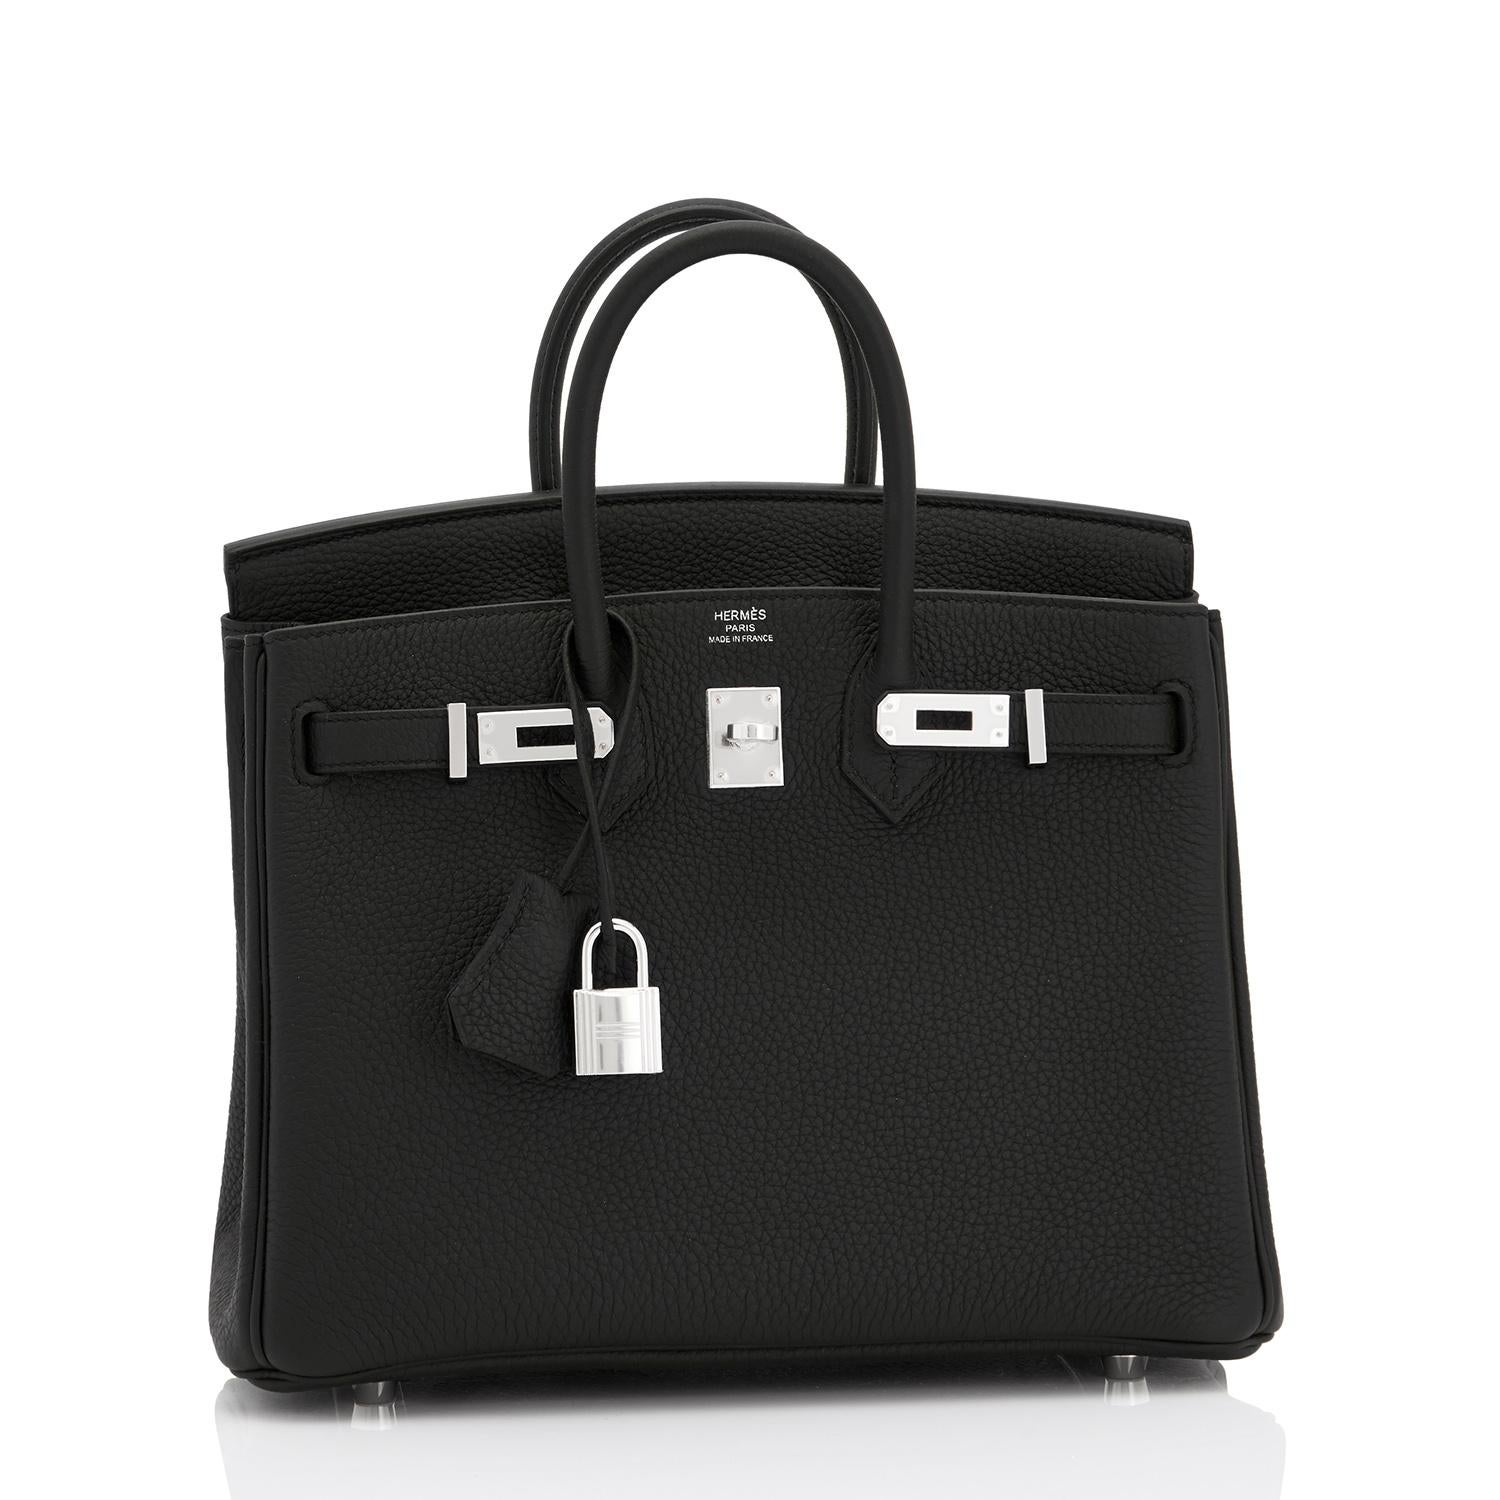 Hermes Black Baby Birkin 25cm Palladium Hardware 
Brand New in Box. Store Fresh. Pristine Condition (with plastic on hardware)
Perfect gift! Comes full set with keys, lock, clochette, a sleeper for the bag, rain protector, and Hermes box.
The